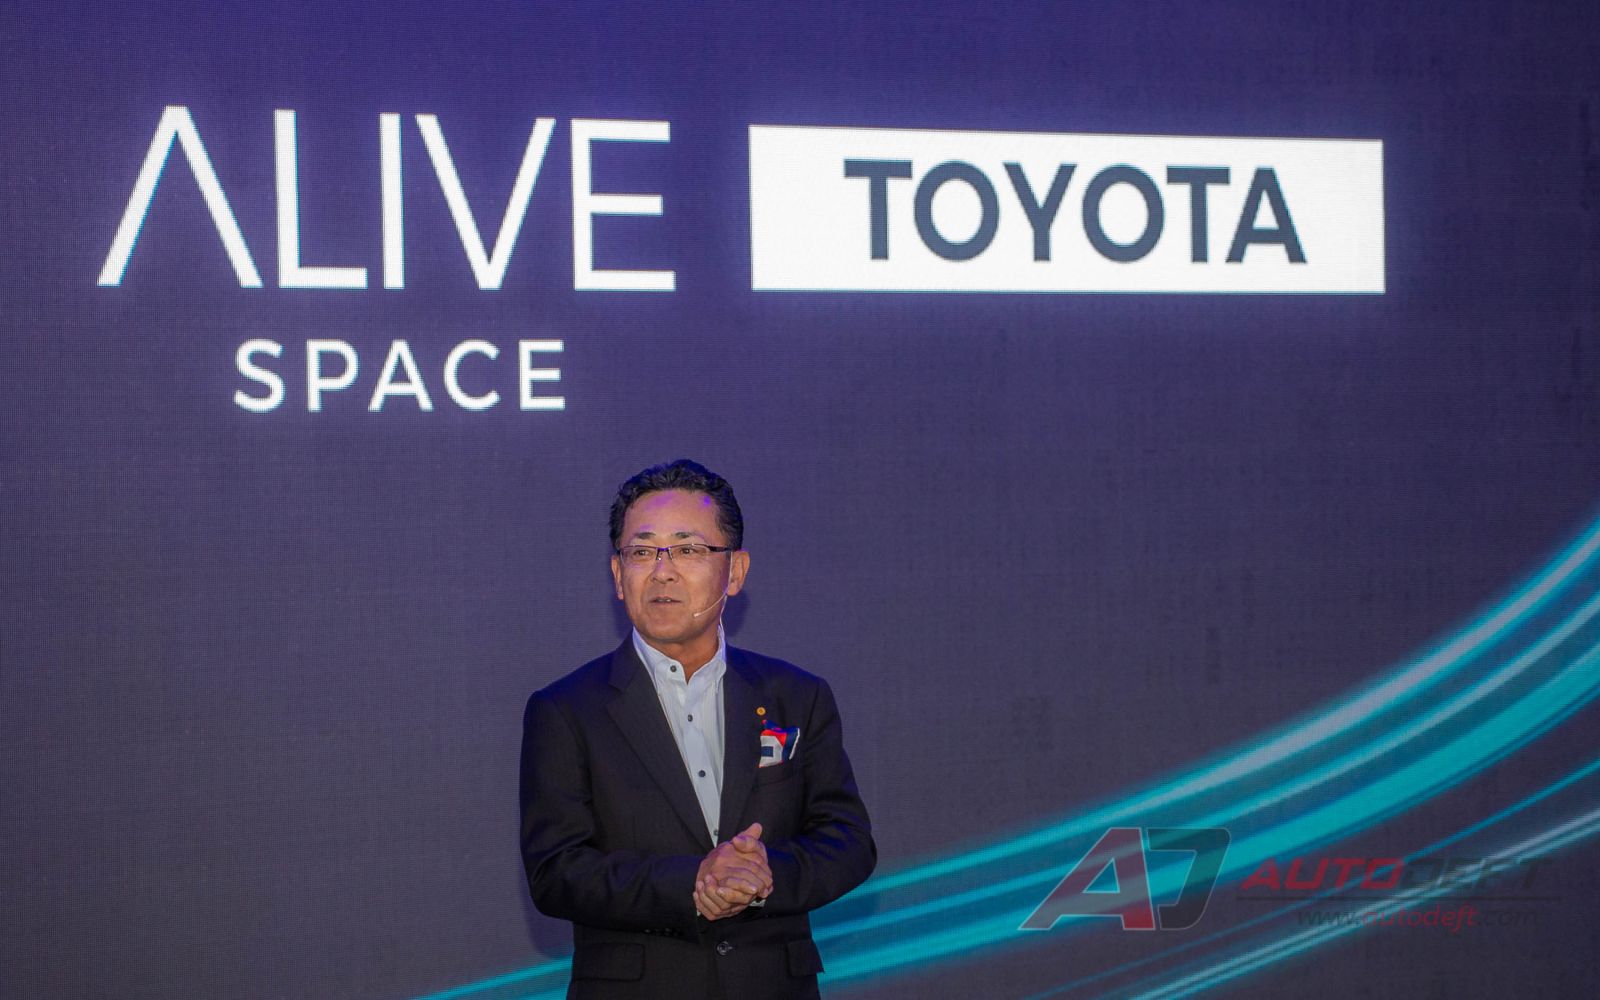 Toyota Alive Space